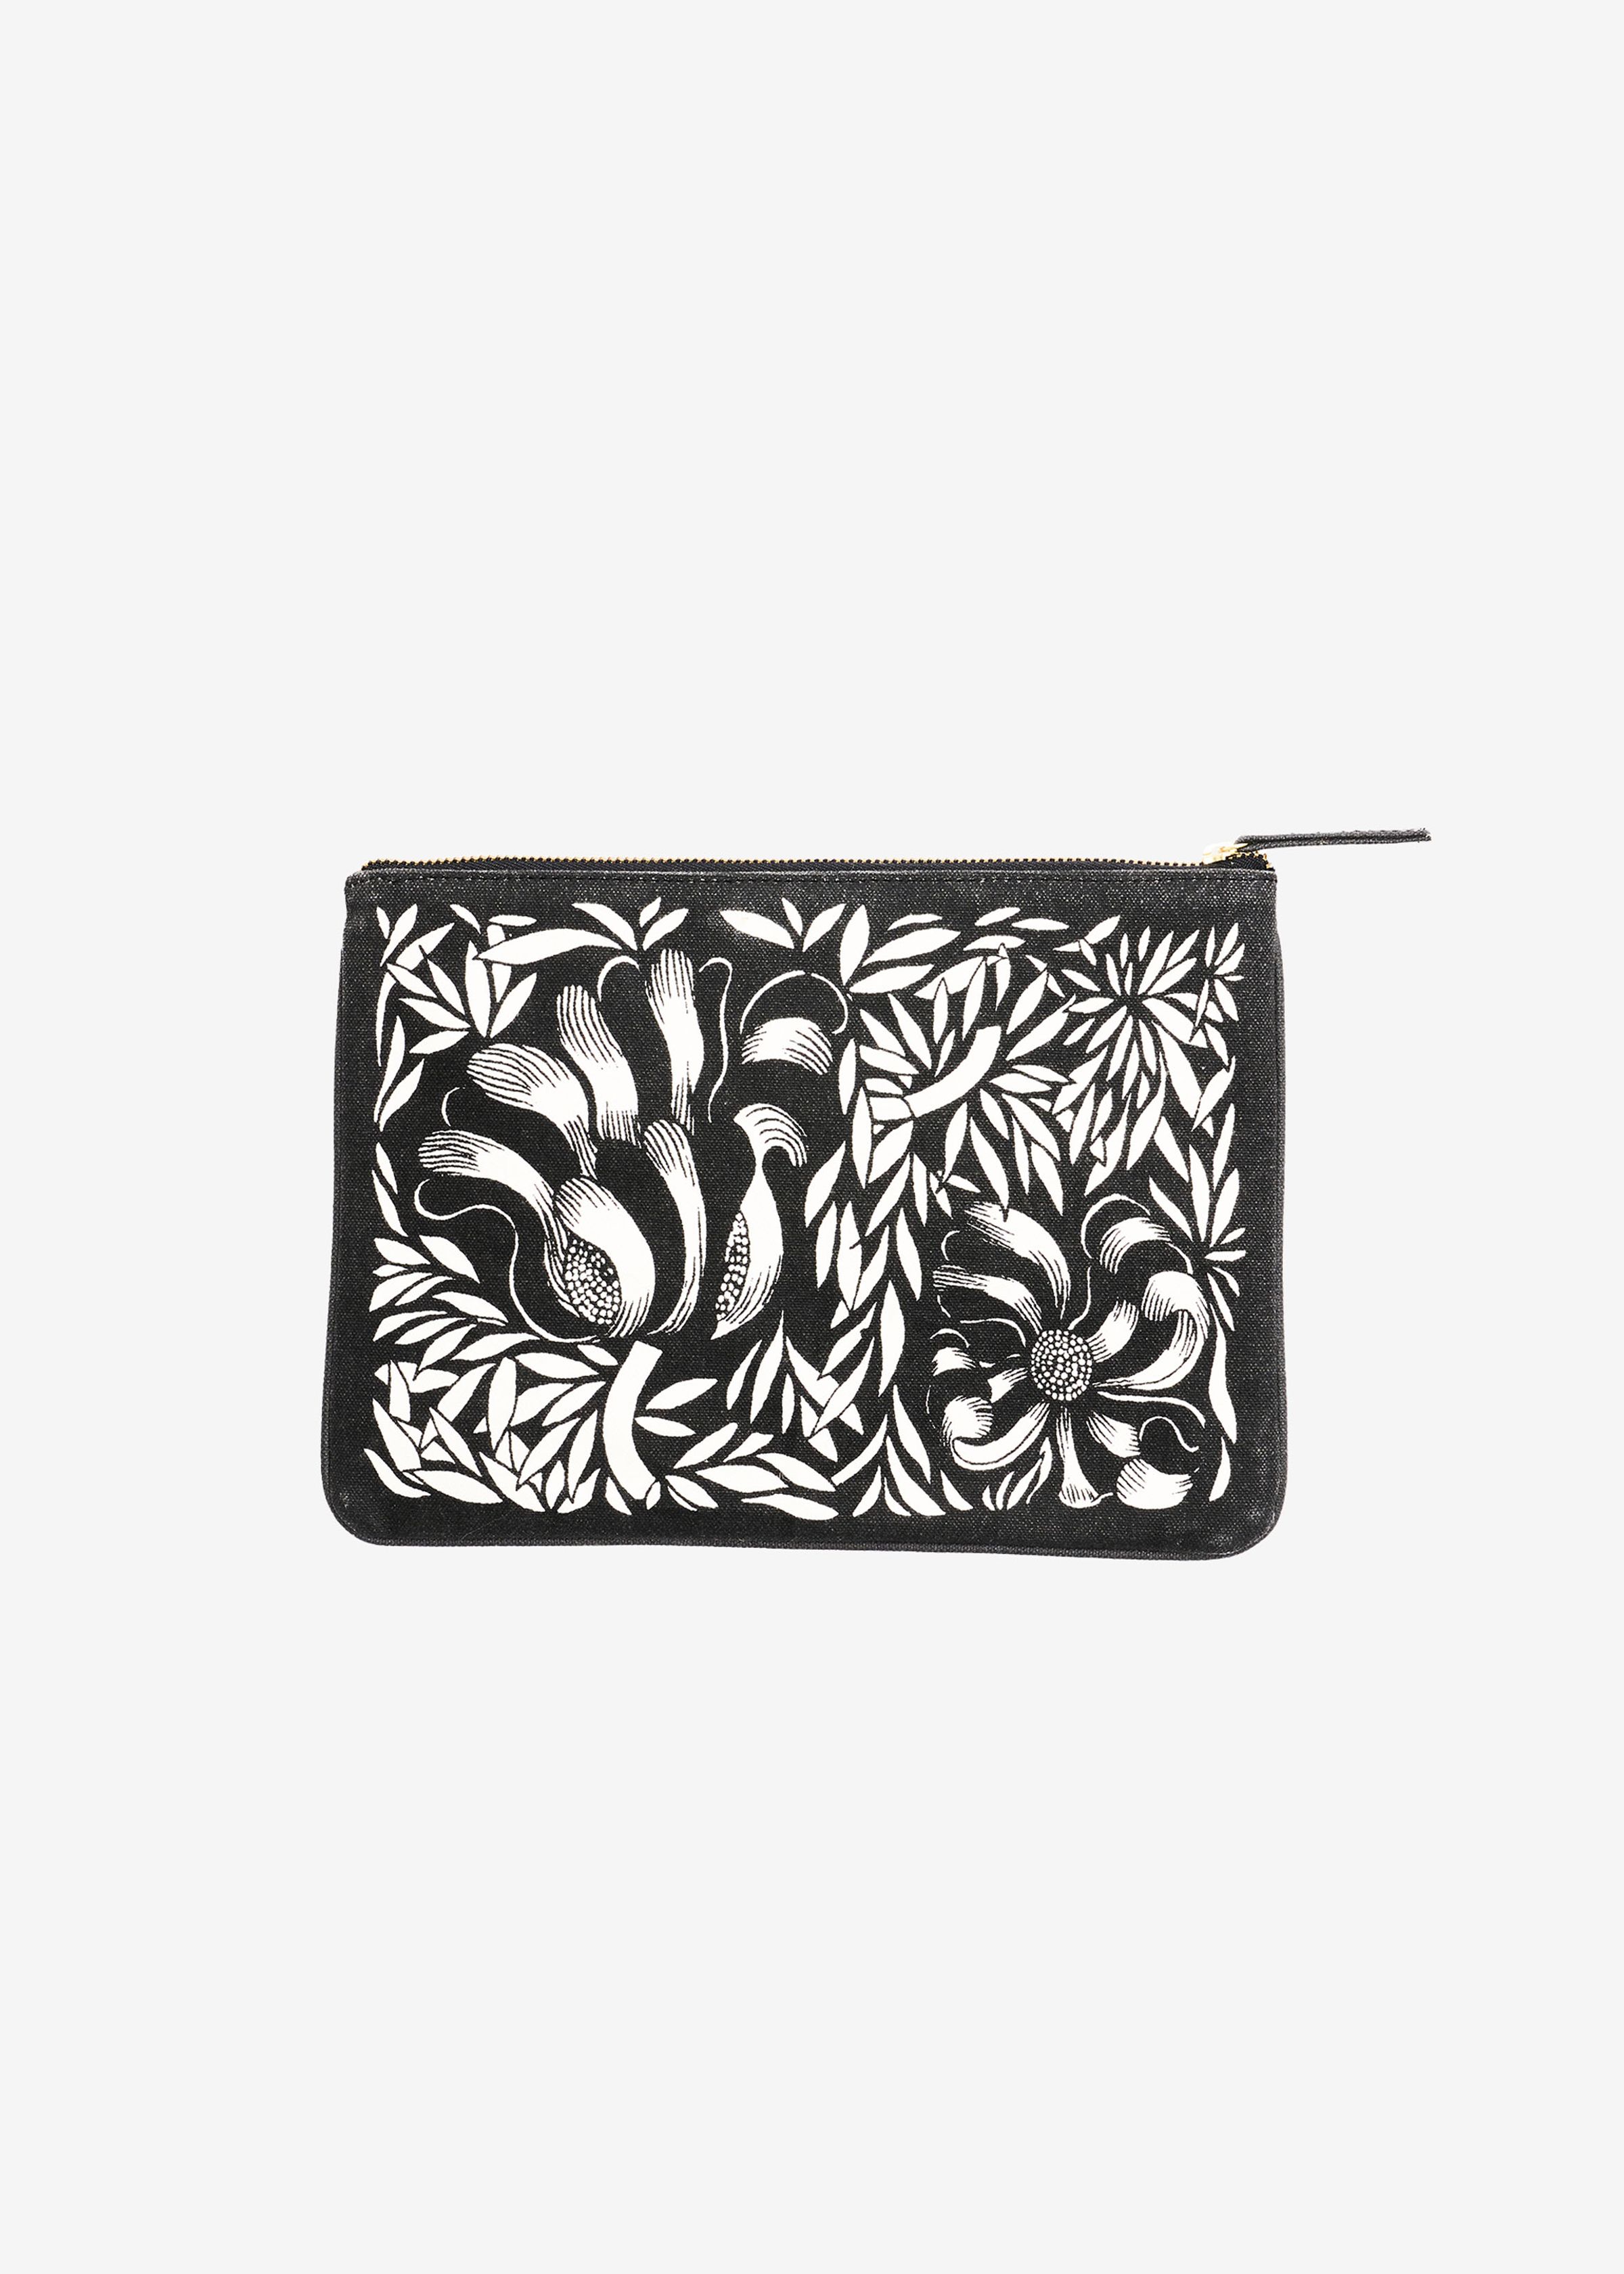 Pouch - Odeon - Black